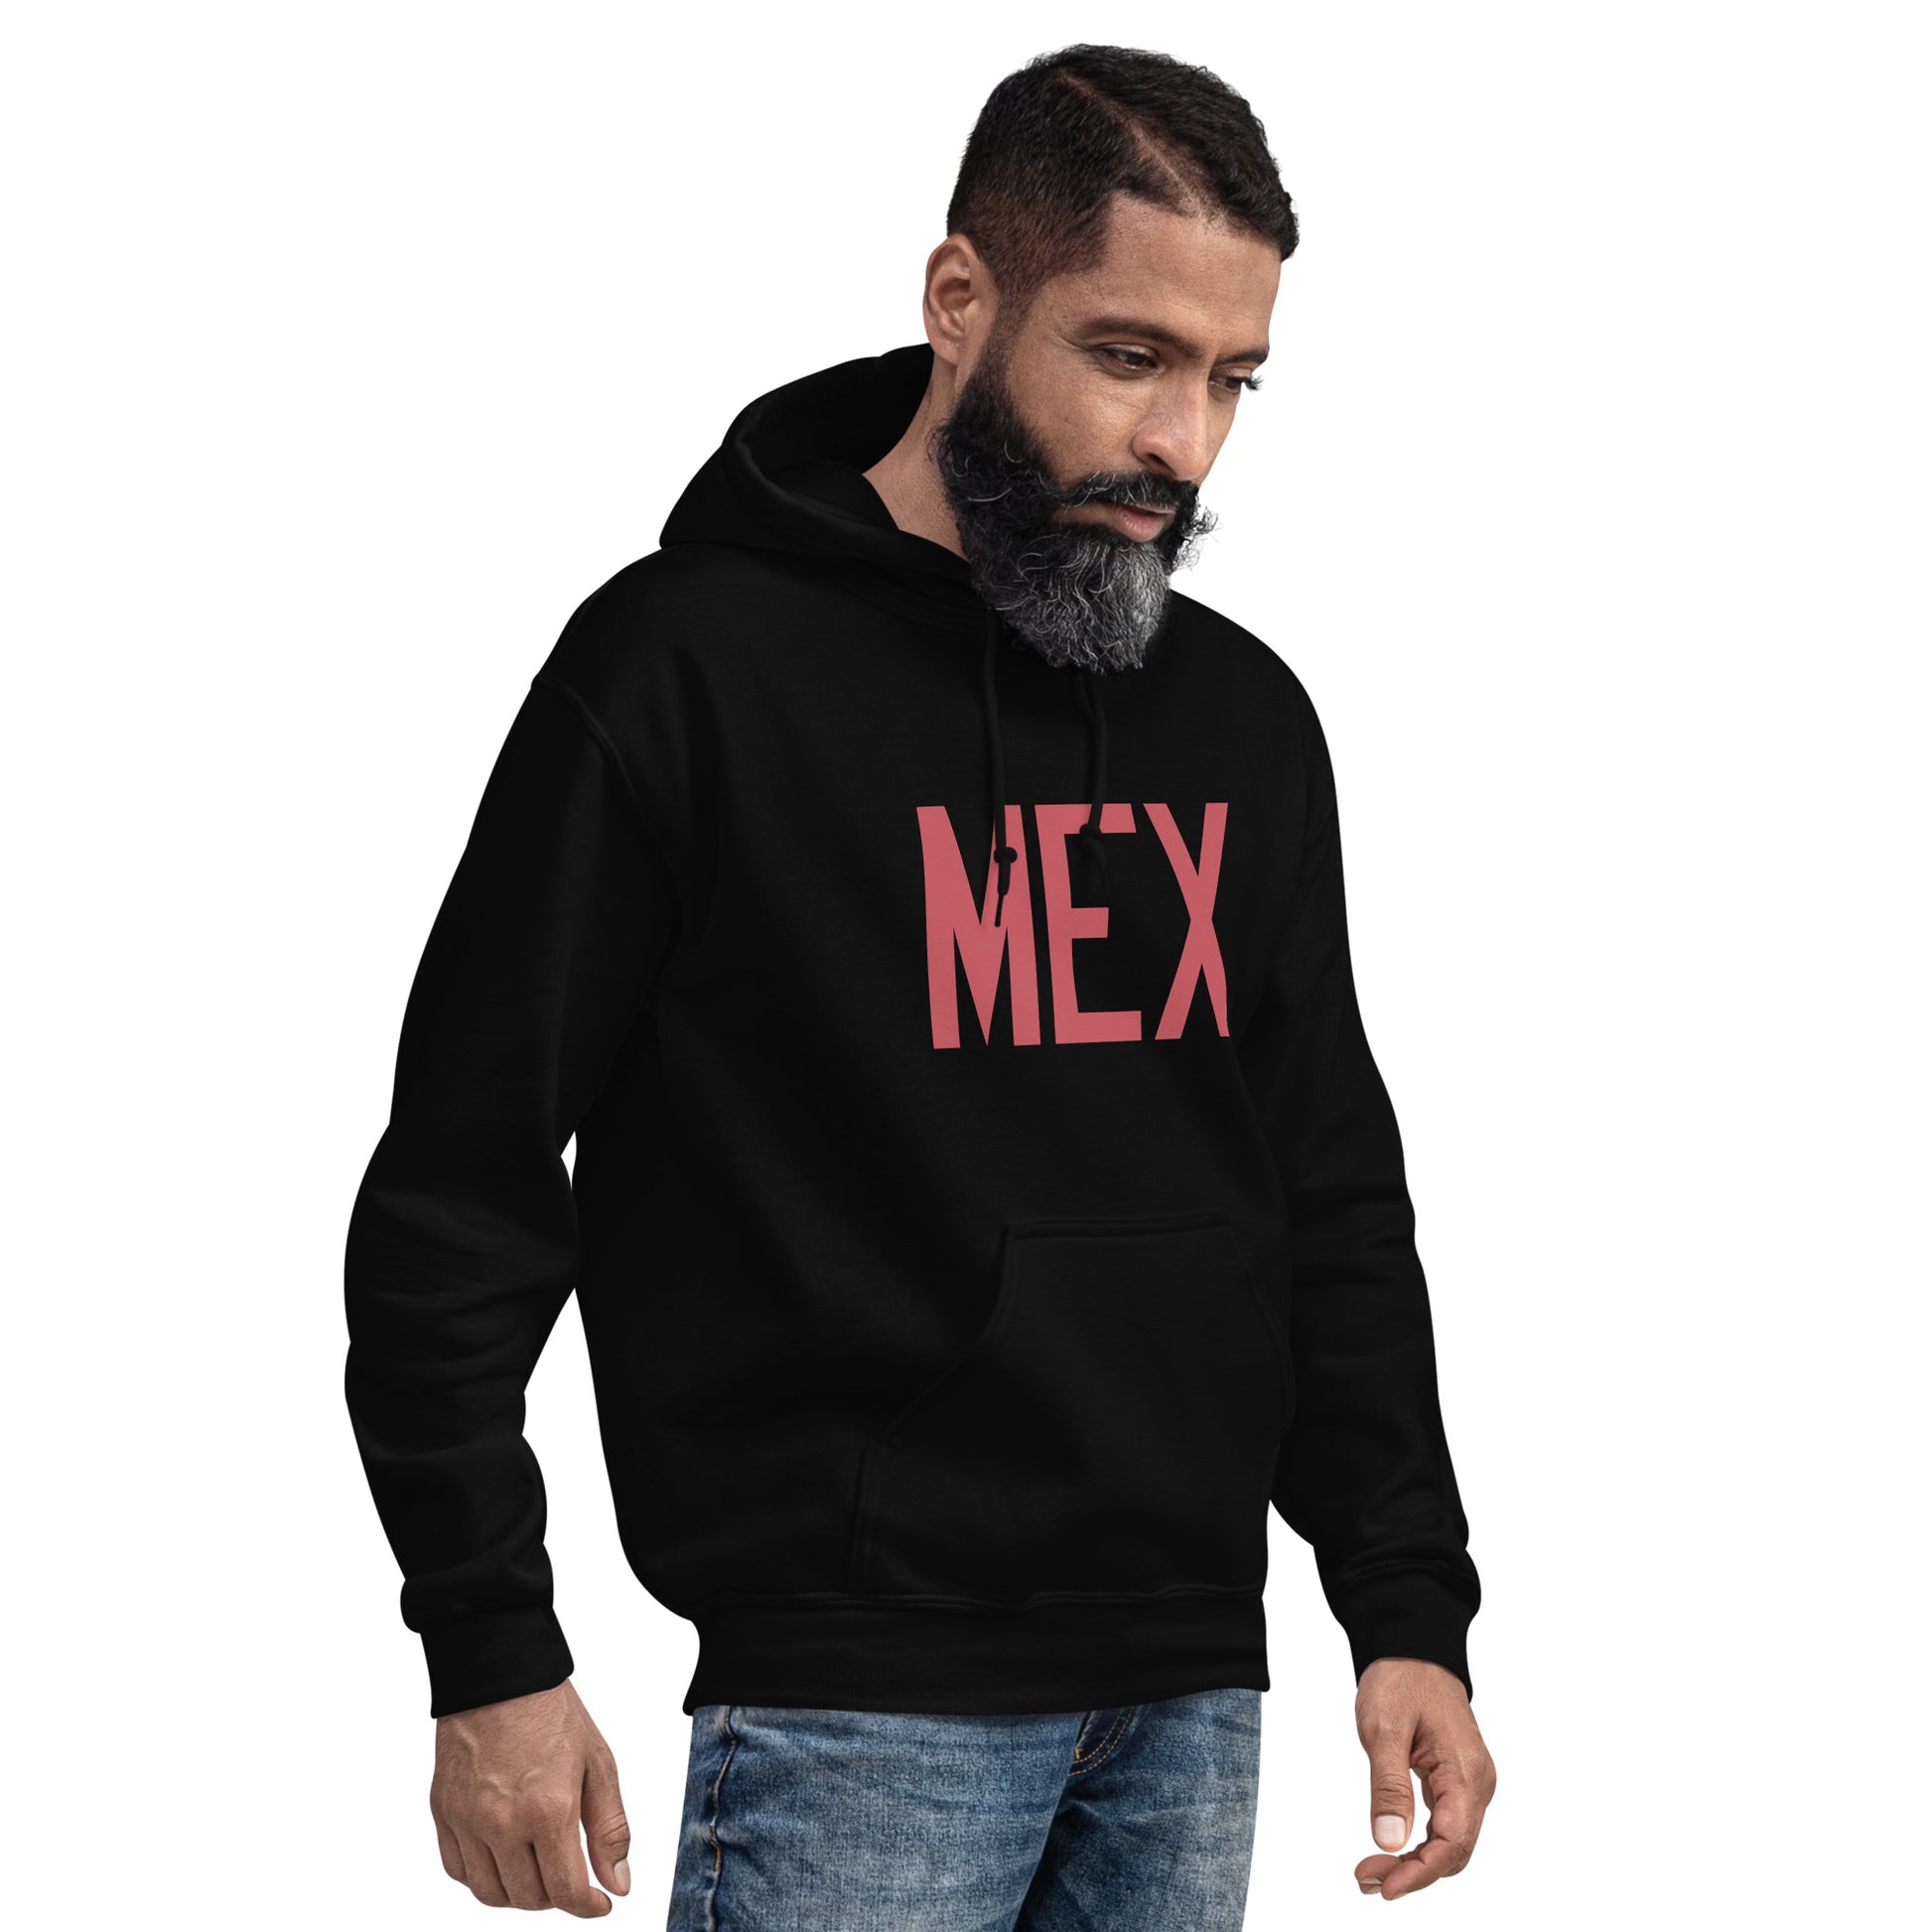 Aviation Enthusiast Hoodie - Deep Pink Graphic • MEX Mexico City • YHM Designs - Image 06